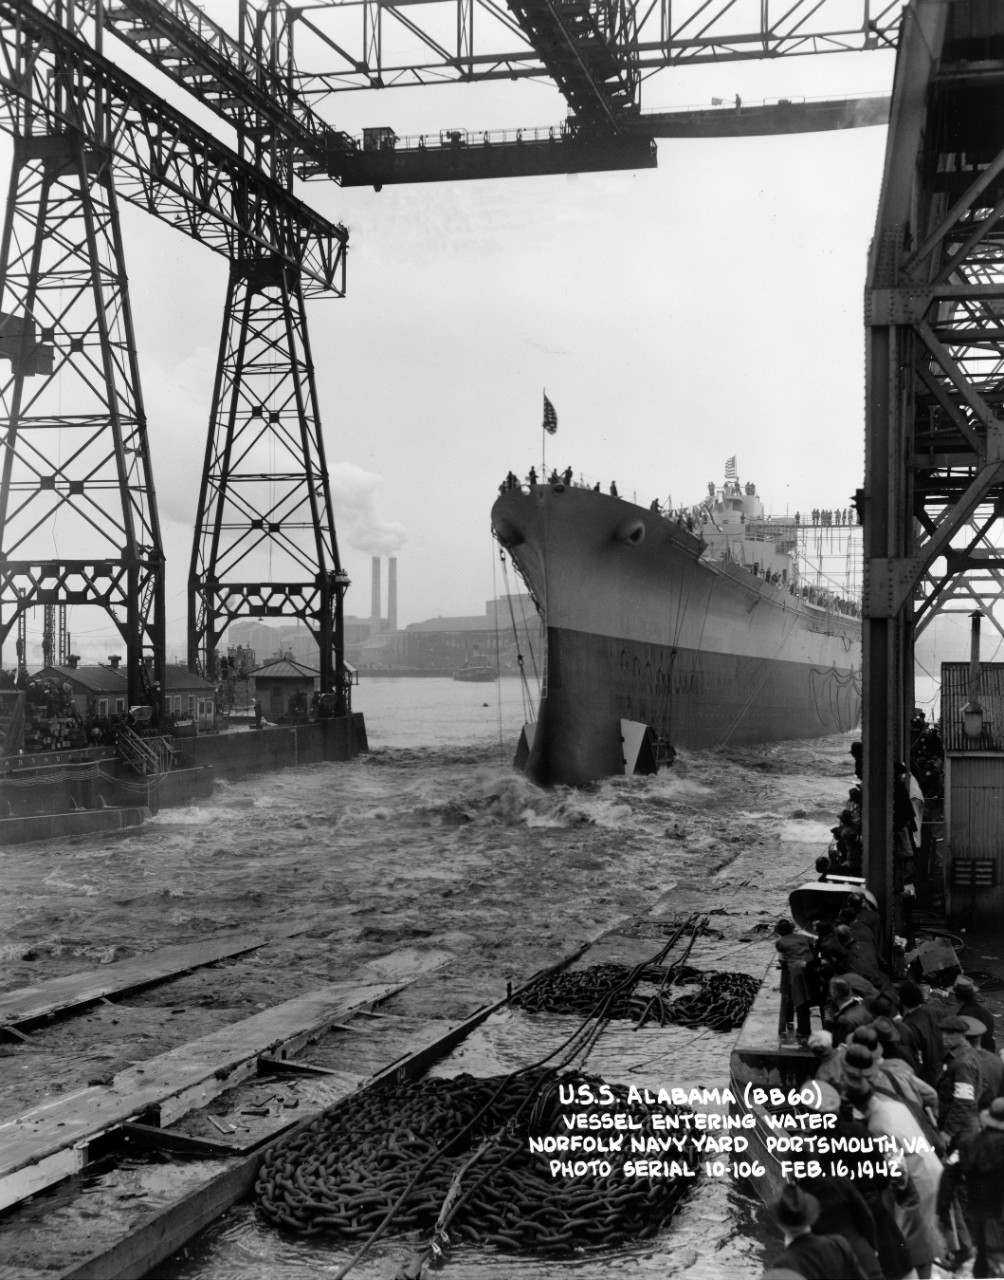 USS Alabama (BB-60) entering water during launching at Norfolk Naval Yard, Portsmouth, VA. February 16, 1942. From the LCDR Carlyle M. Terry Collection.